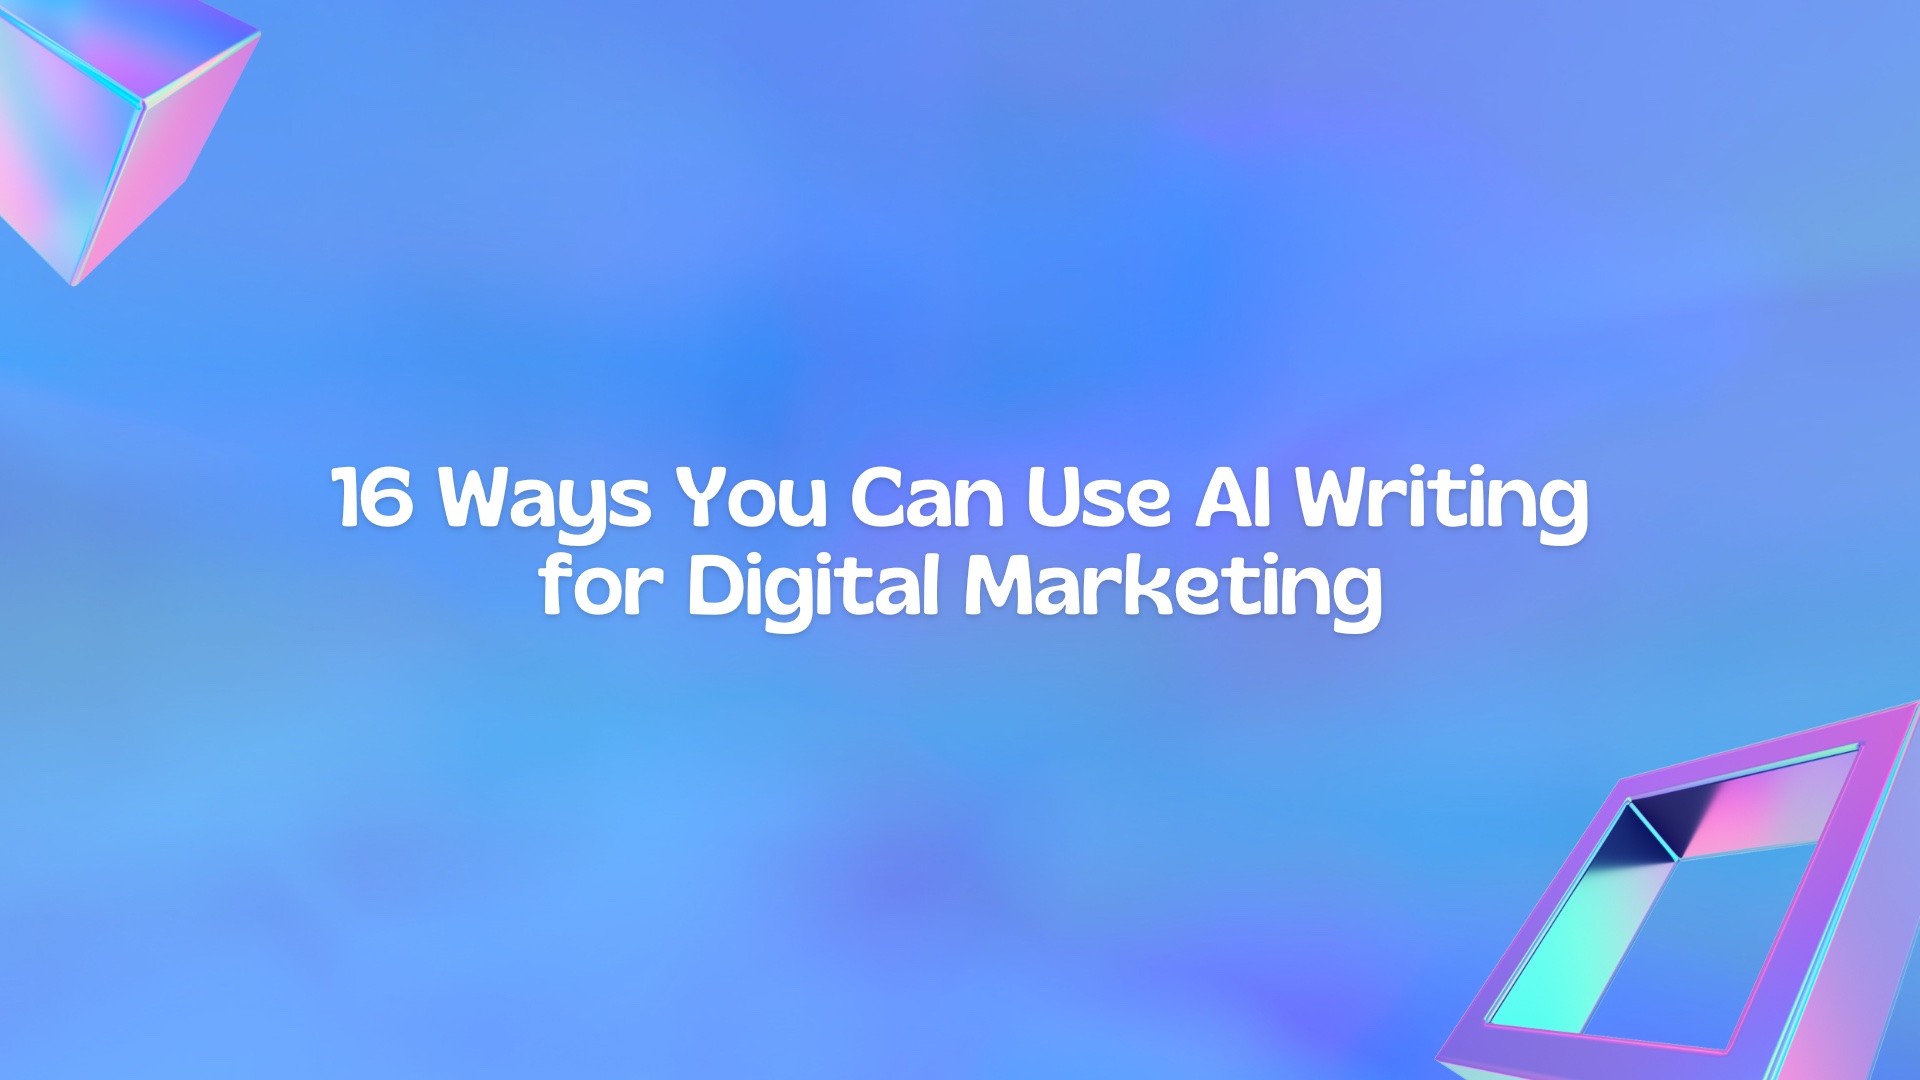 16 Ways You Can Use AI Writing for Digital Marketing